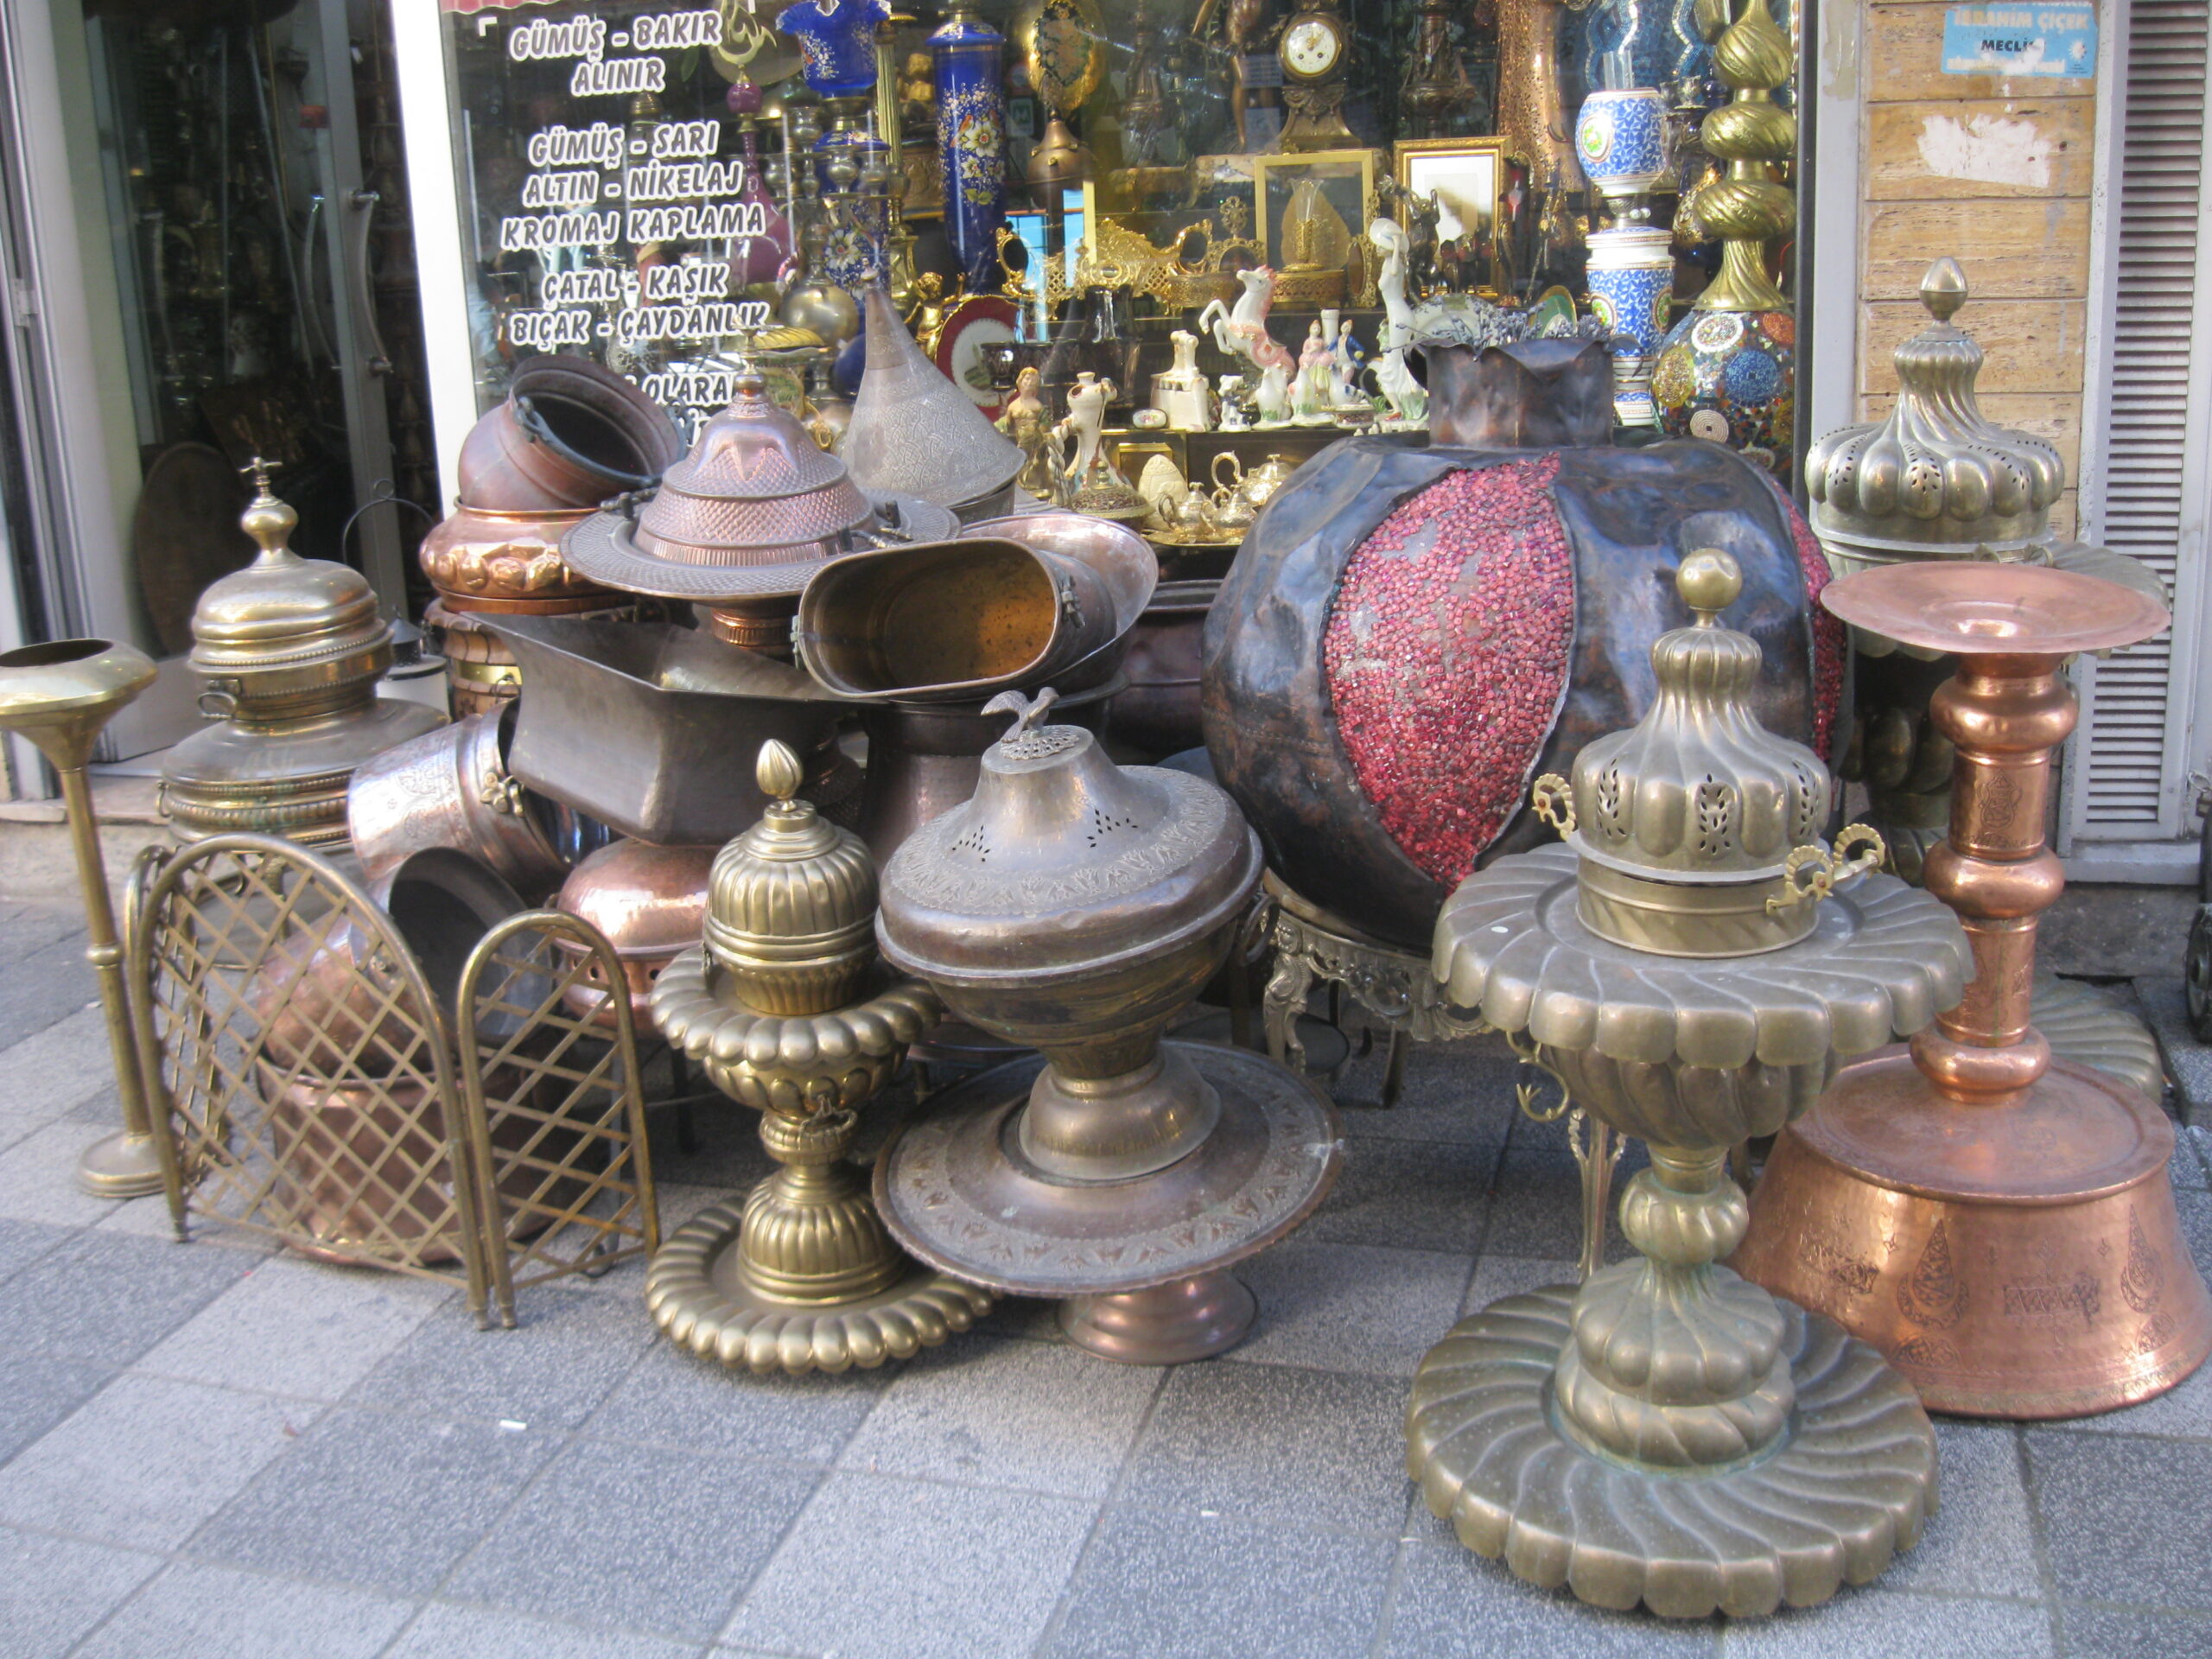 Items for sale at shop on Antique Street Kadikoy